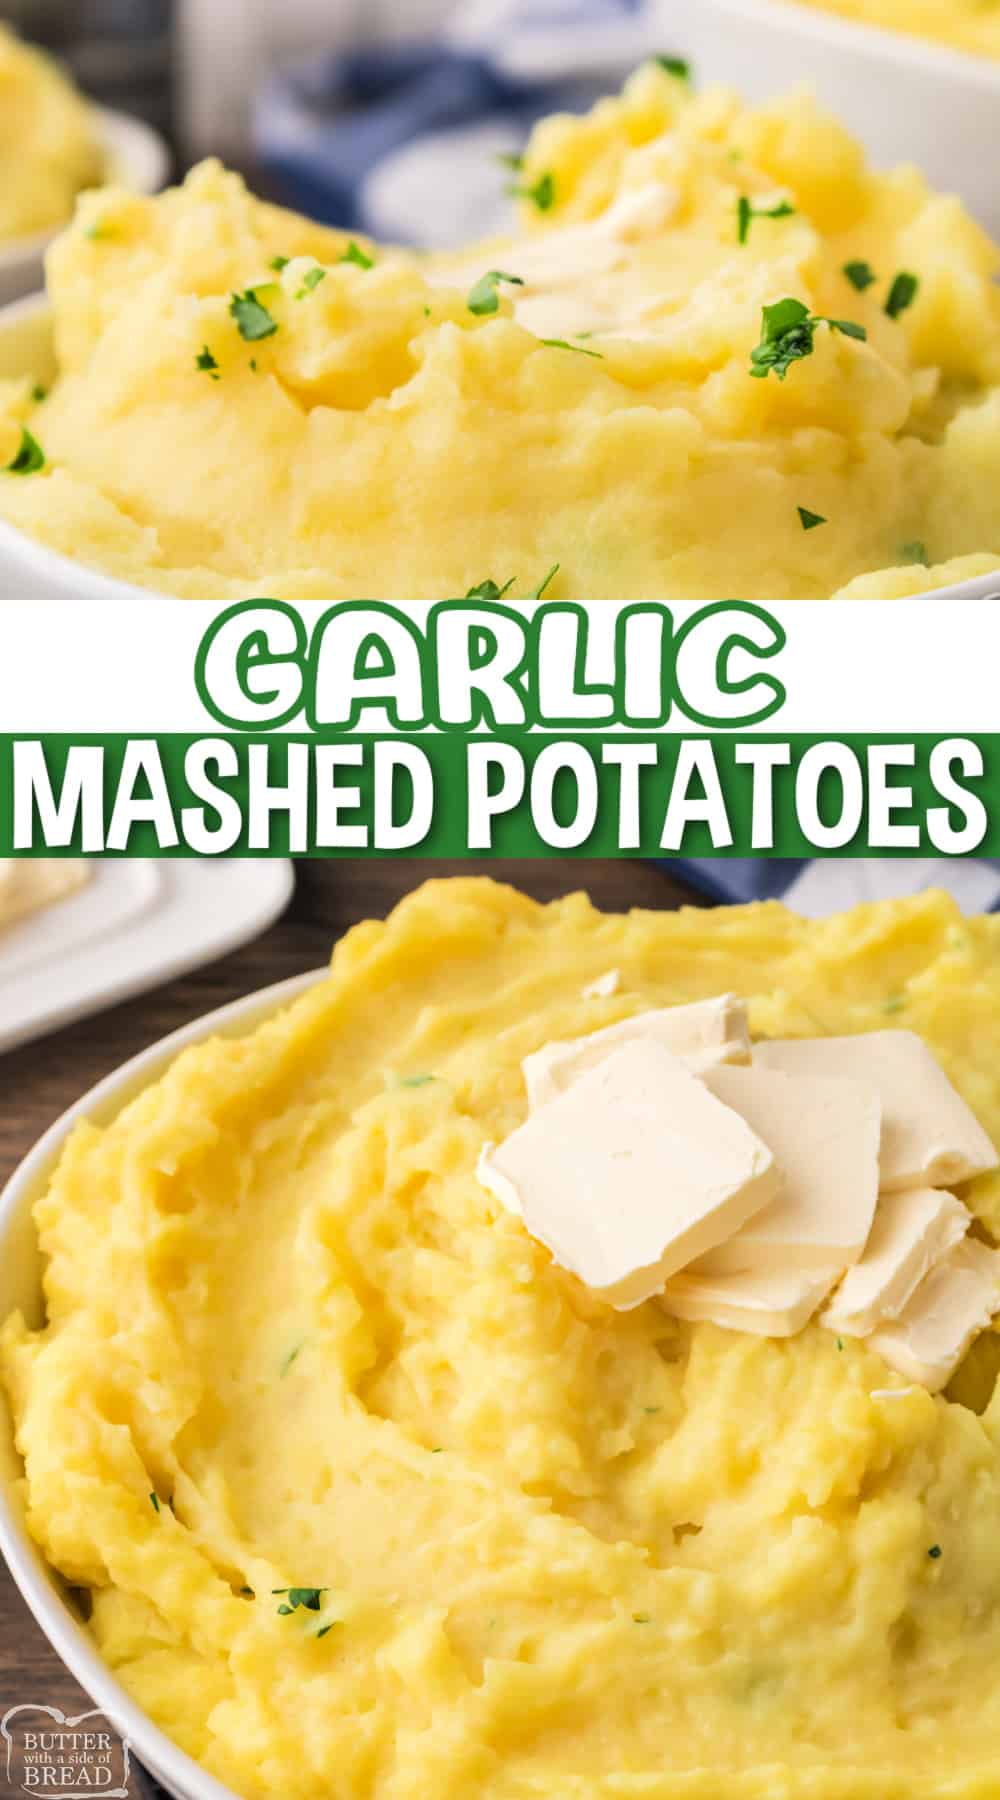 Garlic Mashed Potatoes made with freshly roasted garlic have so much flavor! Delicious mashed potatoes recipe that yields soft and creamy potatoes every time. 